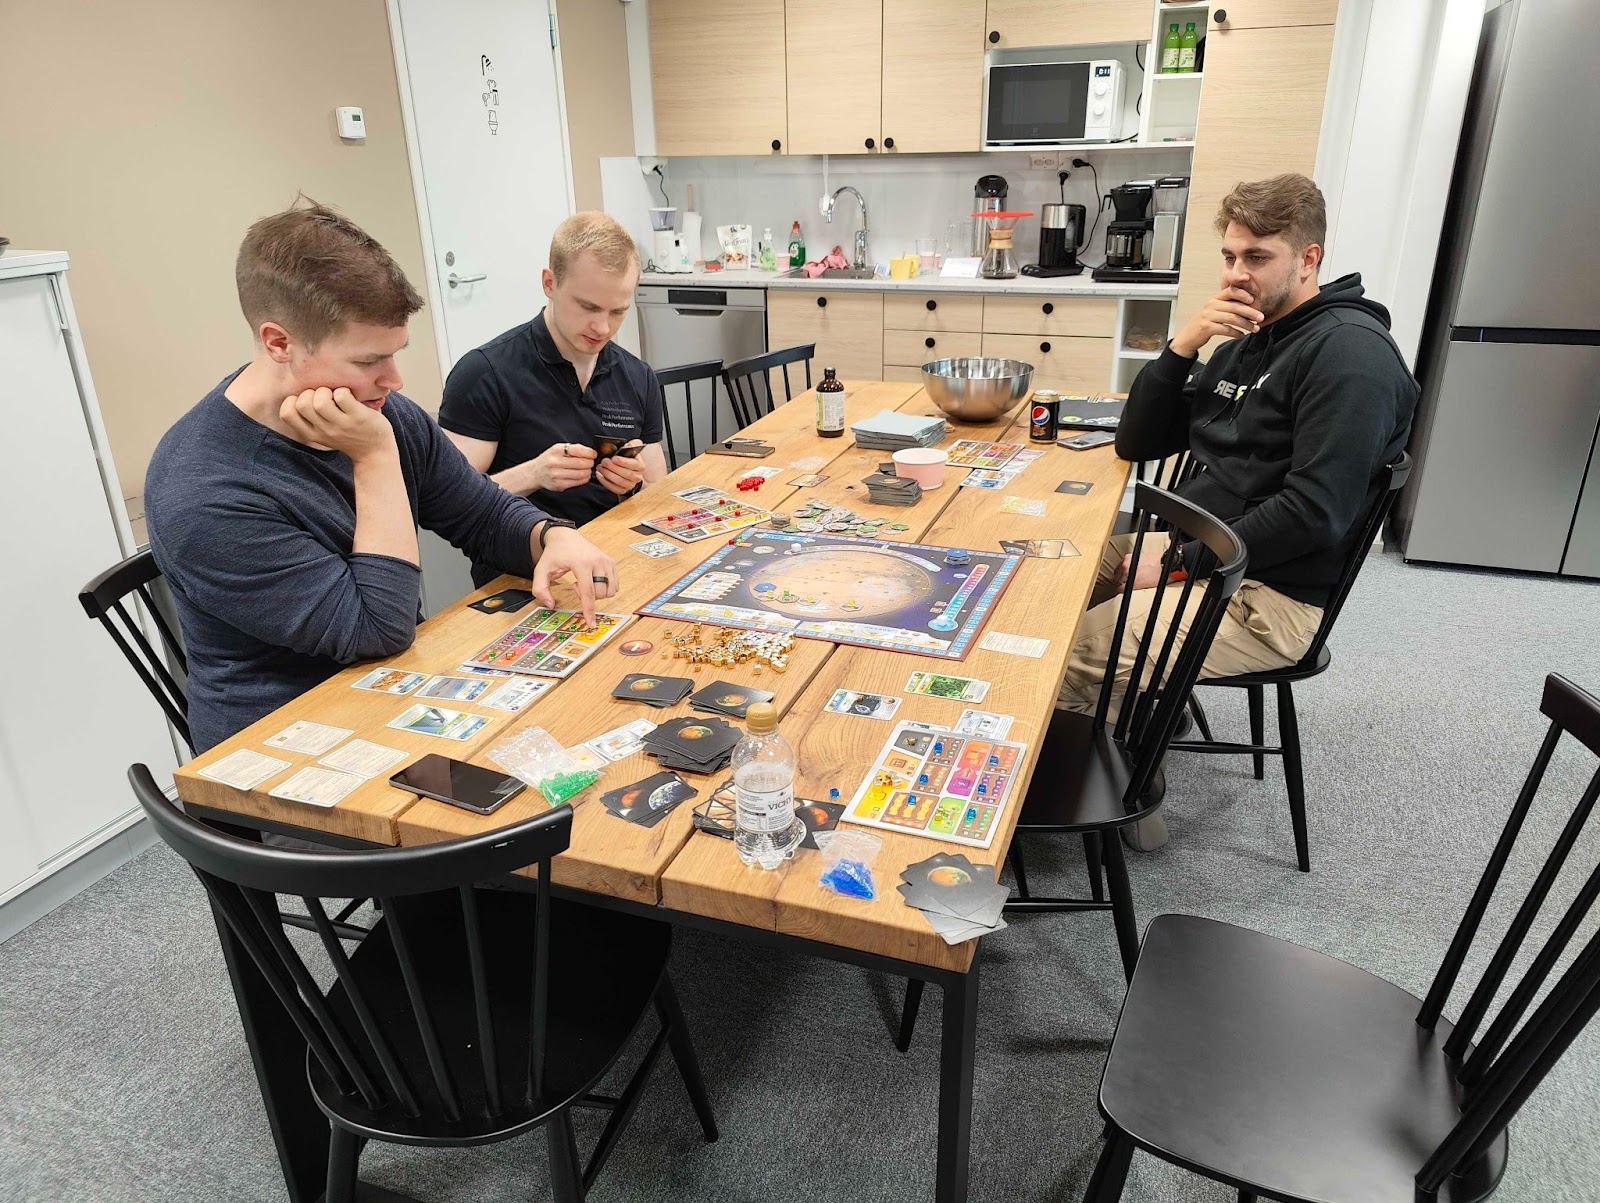 Regular board game nights at the Tampere office have always been a great success. Here we are playing Terraforming Mars.